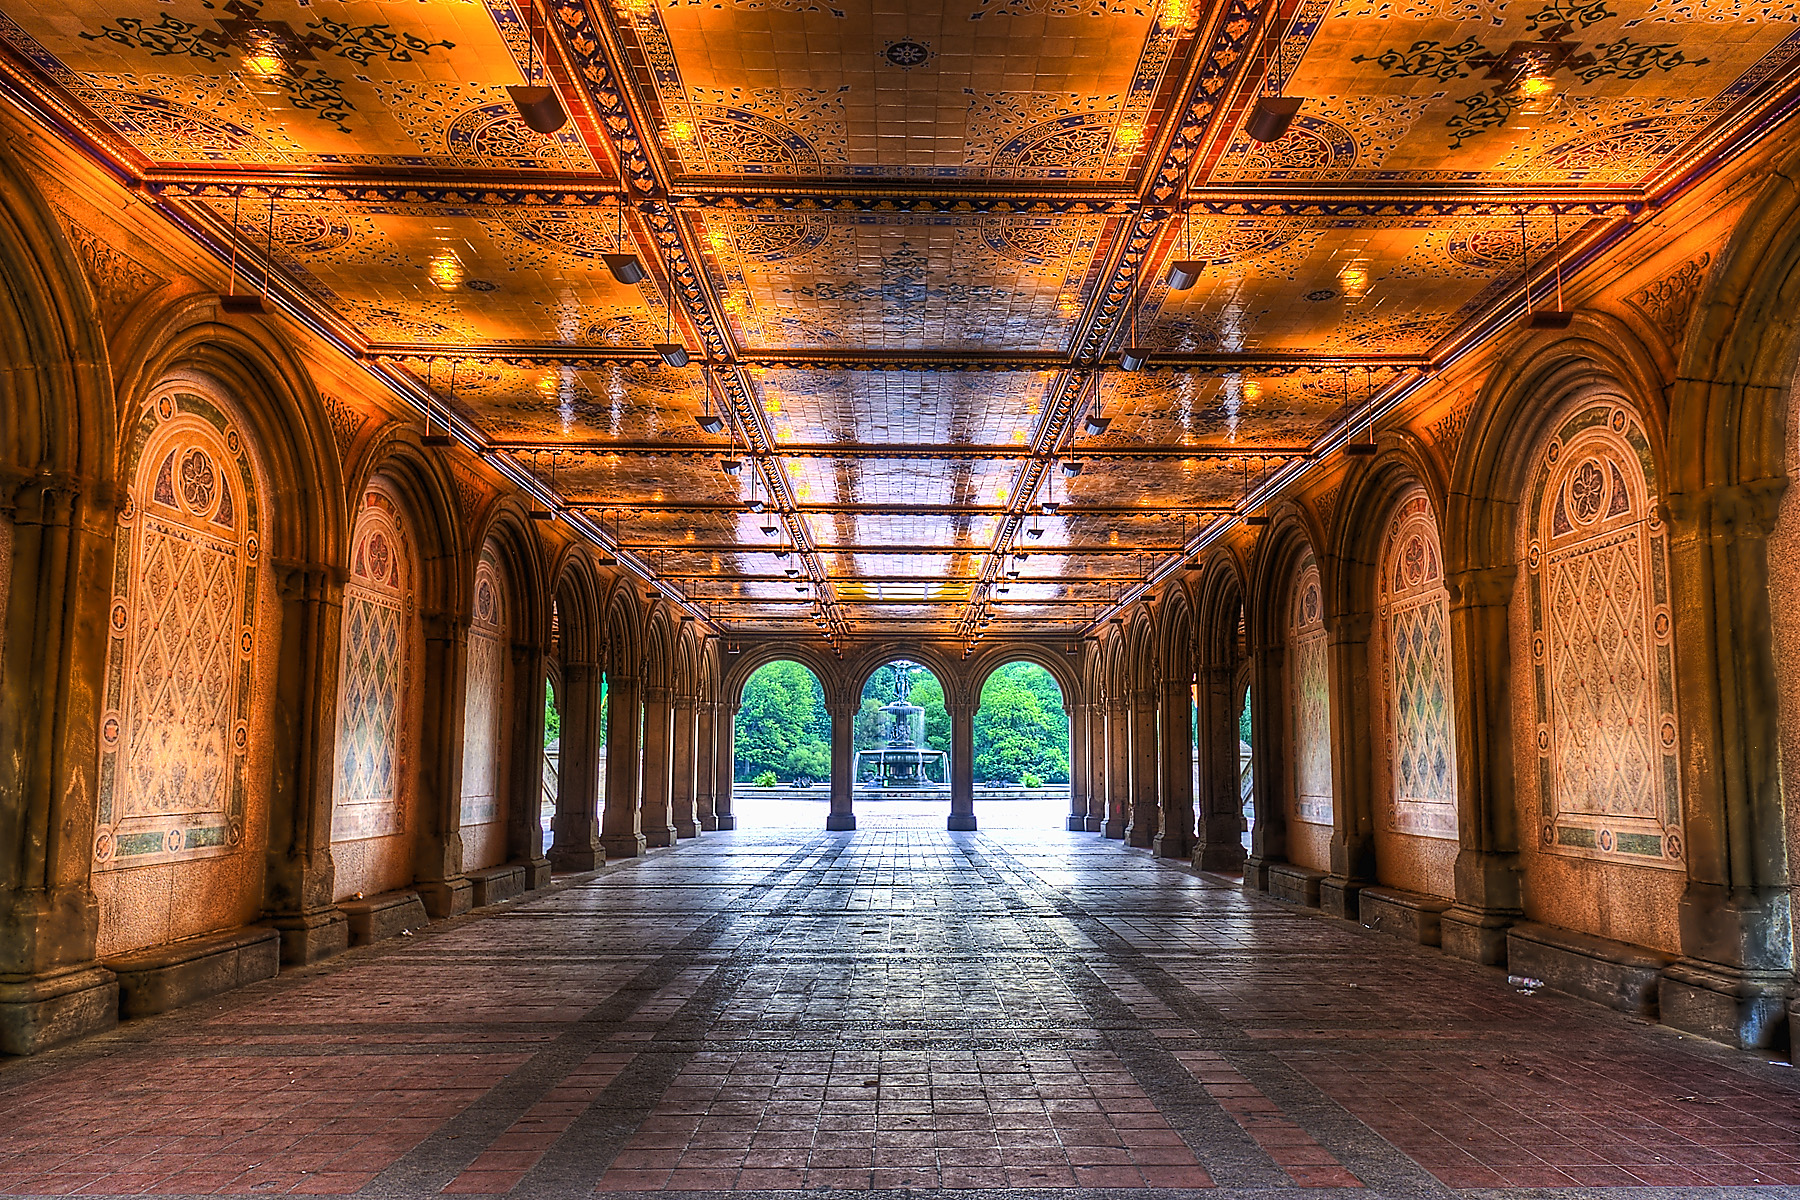 Central Park - From the iconic Bethesda Terrace to the